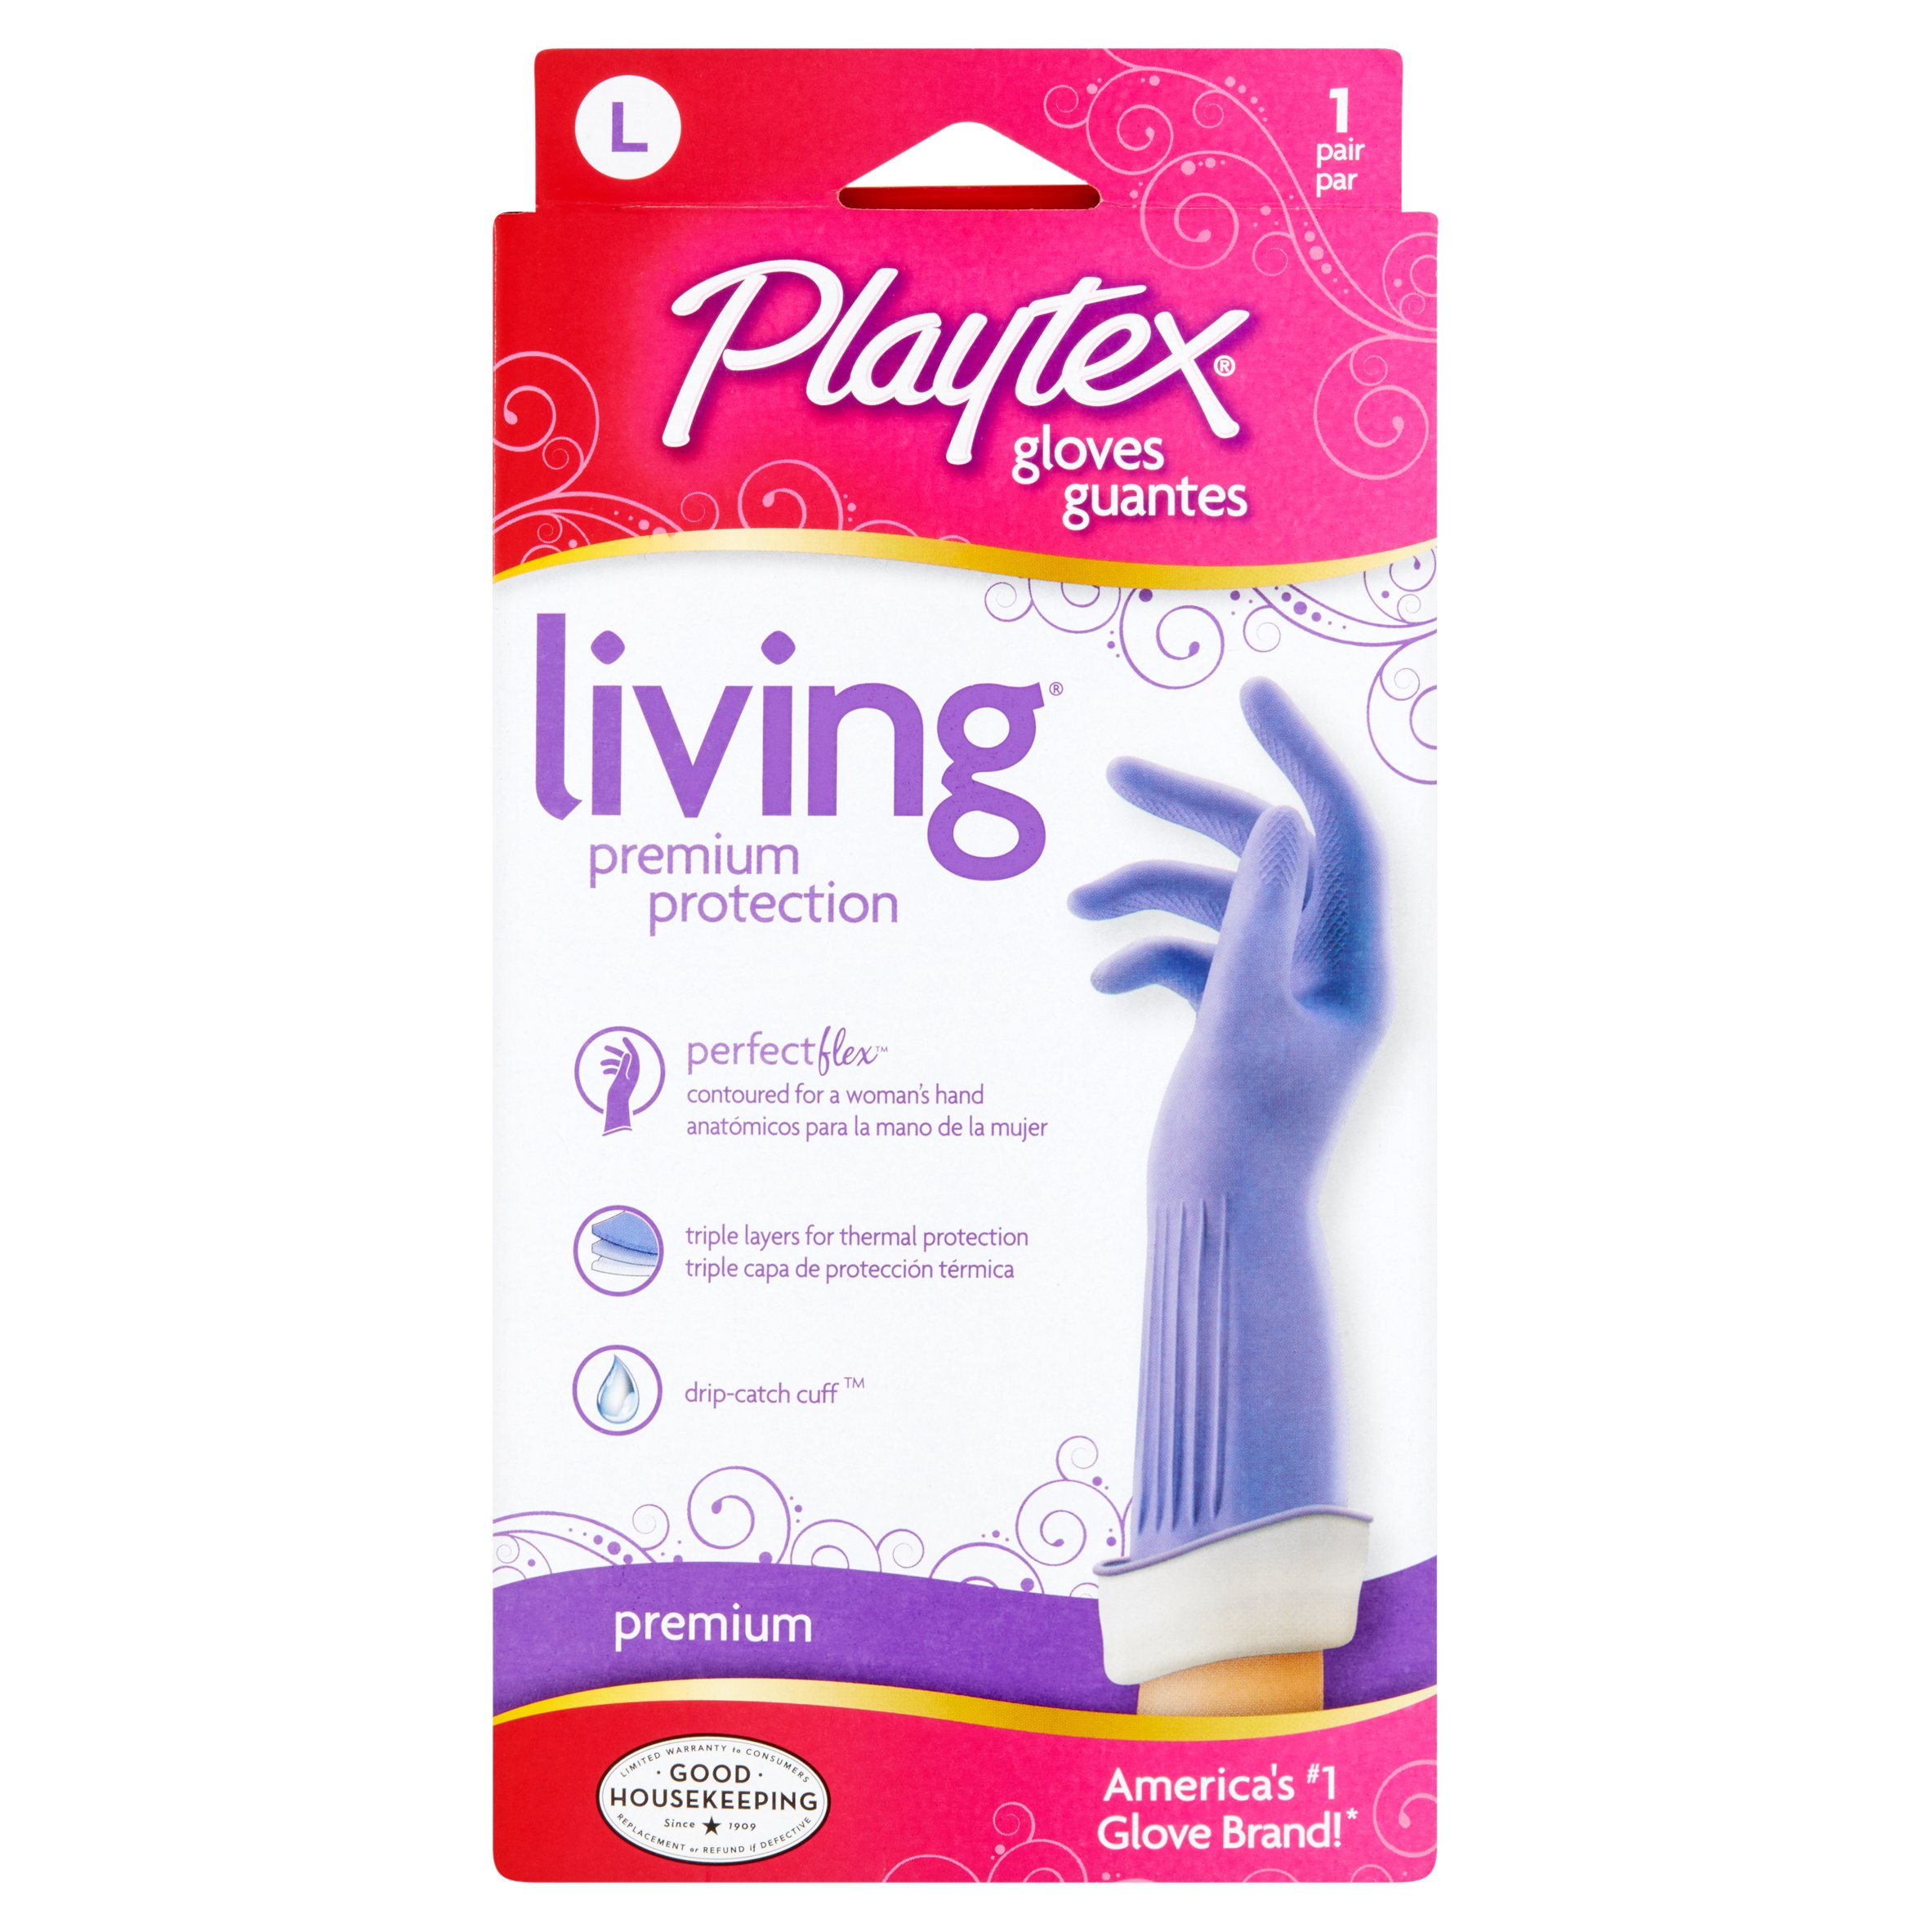 Playtex Living Reusable Gloves With Drip-Catch Cuff Large, Color May Vary - 1 Pair - image 1 of 2